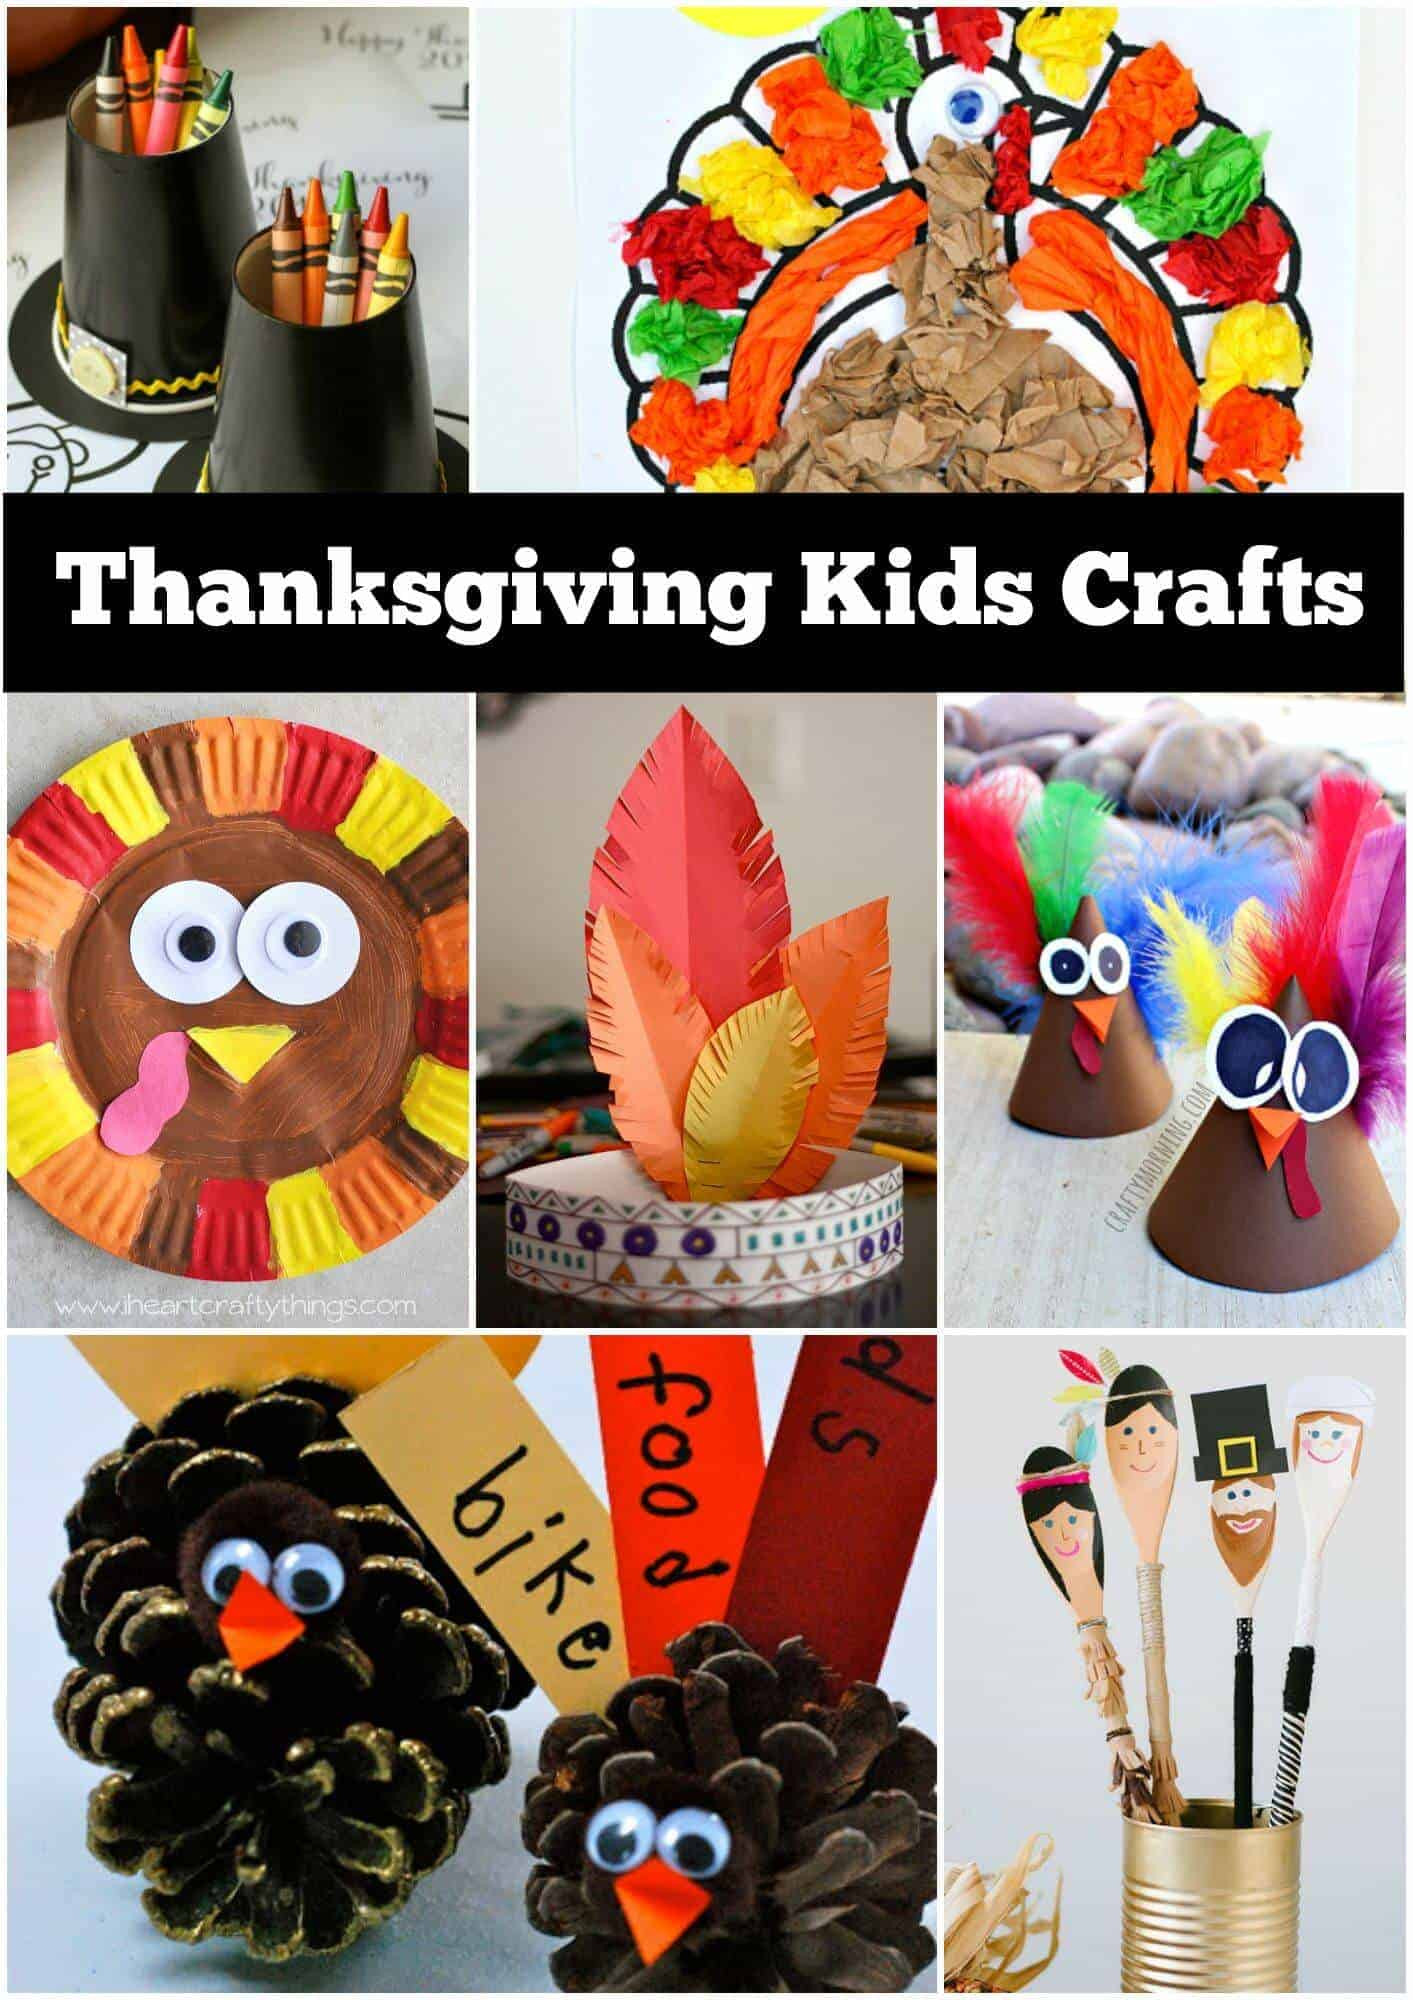 Craft For Kids Thanksgiving
 12 Thanksgiving Craft Ideas for kids Page 2 of 2